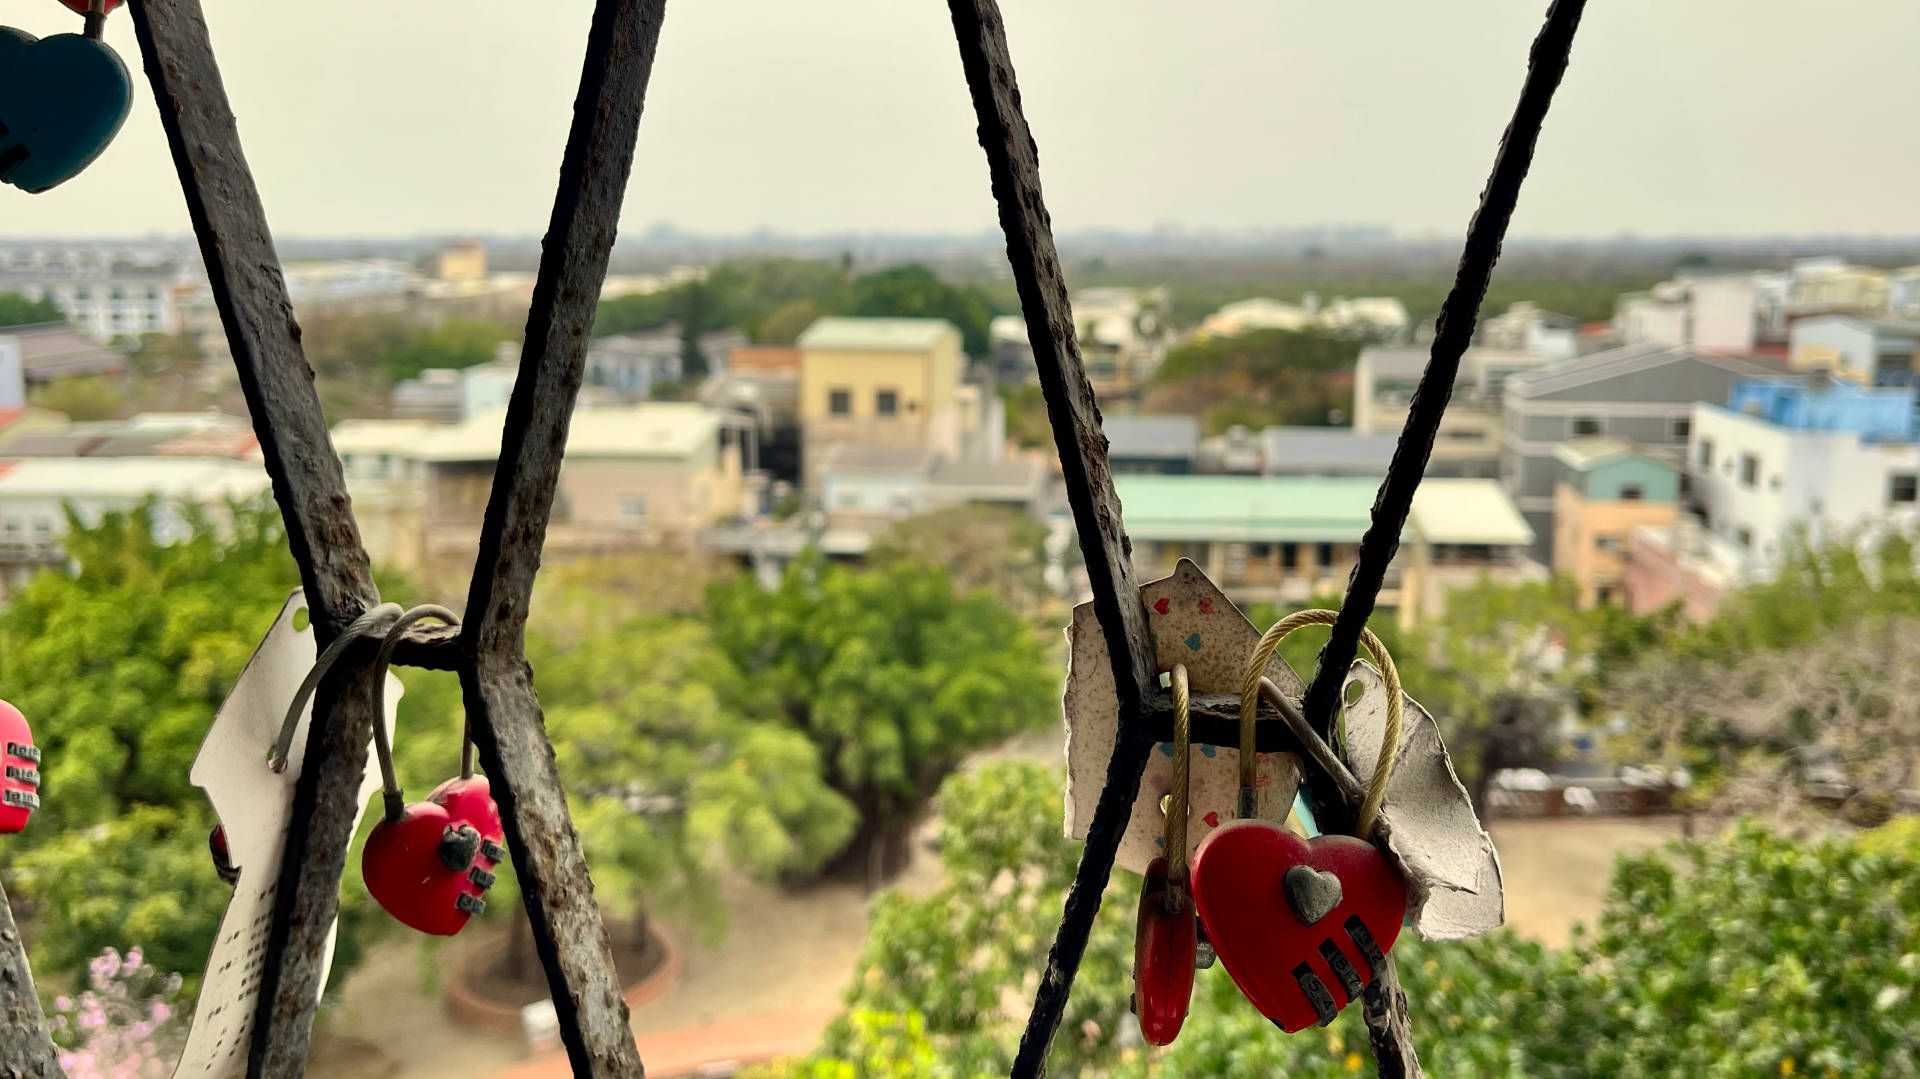 View across Tainan from Anping Old Fort Tower. Rusted metal grates cover the opening, with heart-shaped padlocks and paper notes attached.